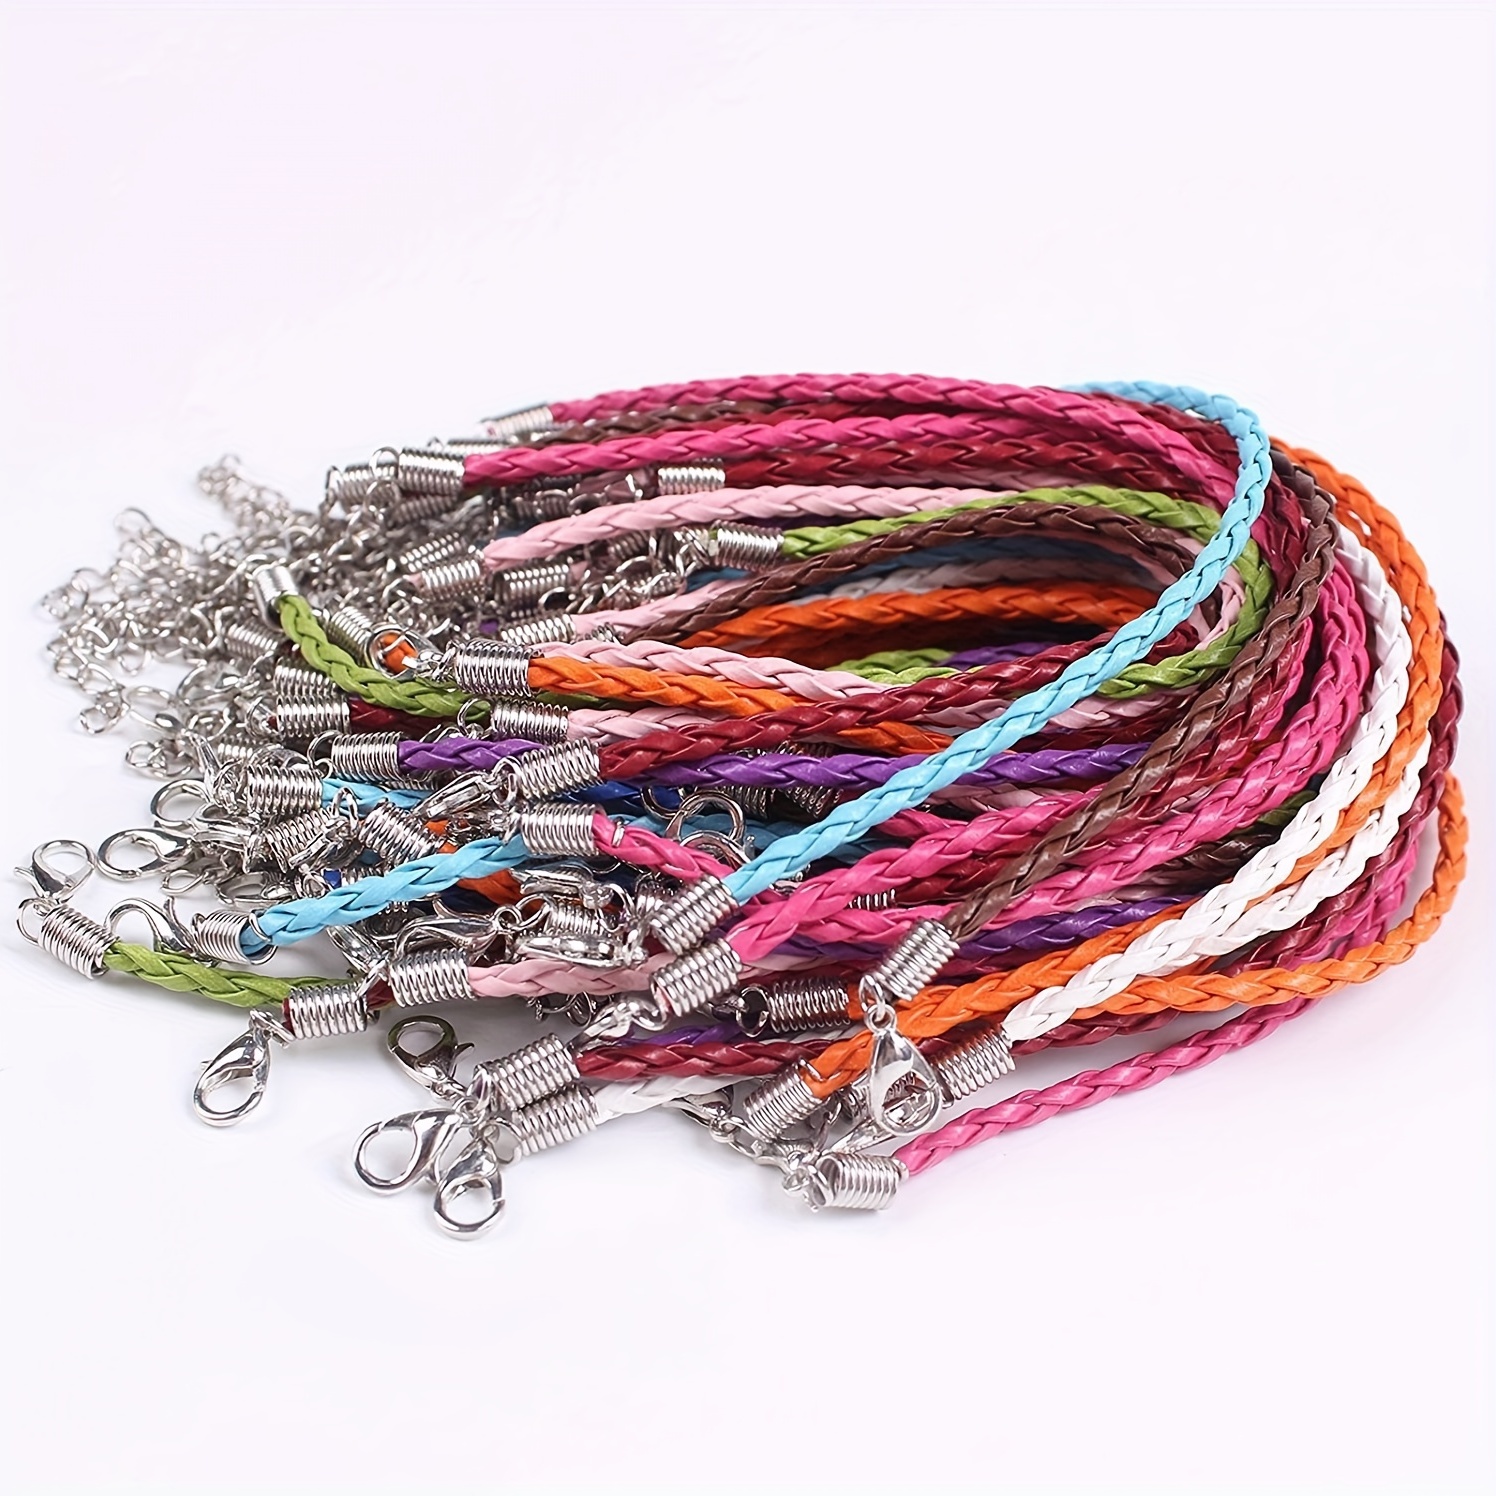 

10pcs Mixed Color Leather Lace Braided Bracelet Rope Diy Jewelry Hand Braided Rope With Lobster Clasp Extension Chain For Wrist Pendant Bracelet Jewelry Production